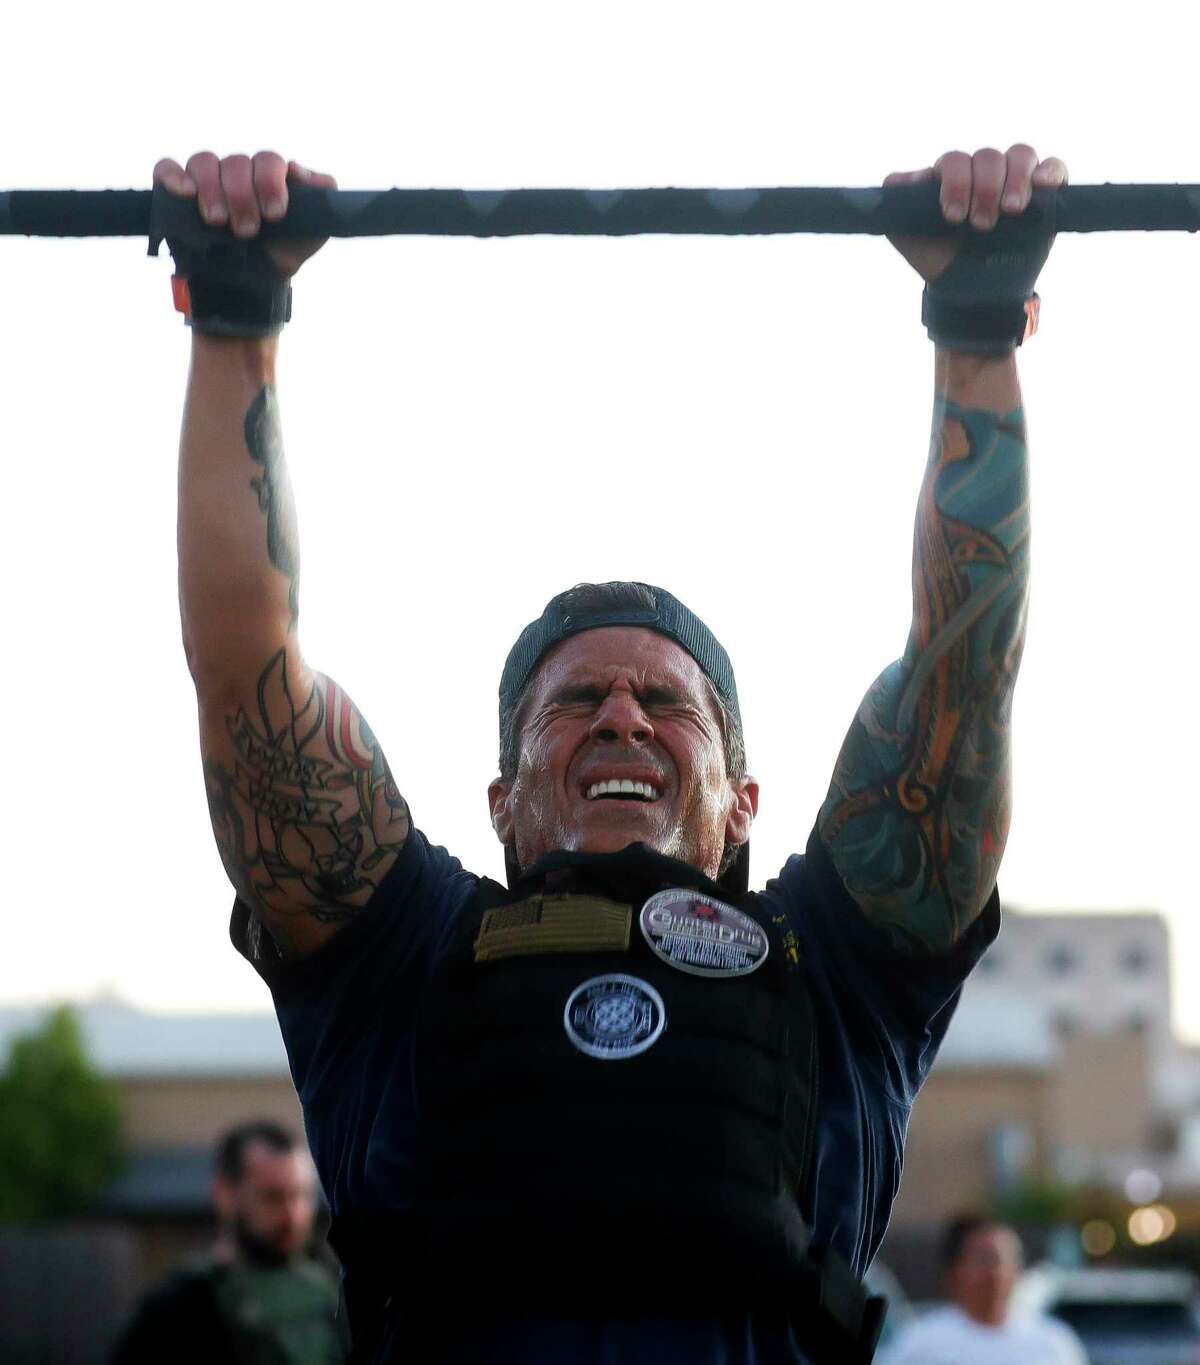 Joey Lopez works through his last 100 pull ups as participants compete in the inaugural Murph Challenge, Saturday, May 28, 2022, in Conroe. The challenge honors Michael P. Murphy’s sacrifice and memory, part of the Lone Survivor squad with Marcus Lutrell, by following his daily workout of a one-mile run, 100 pull ups, 200 push ups and 300 squats followed by another one-mile run.